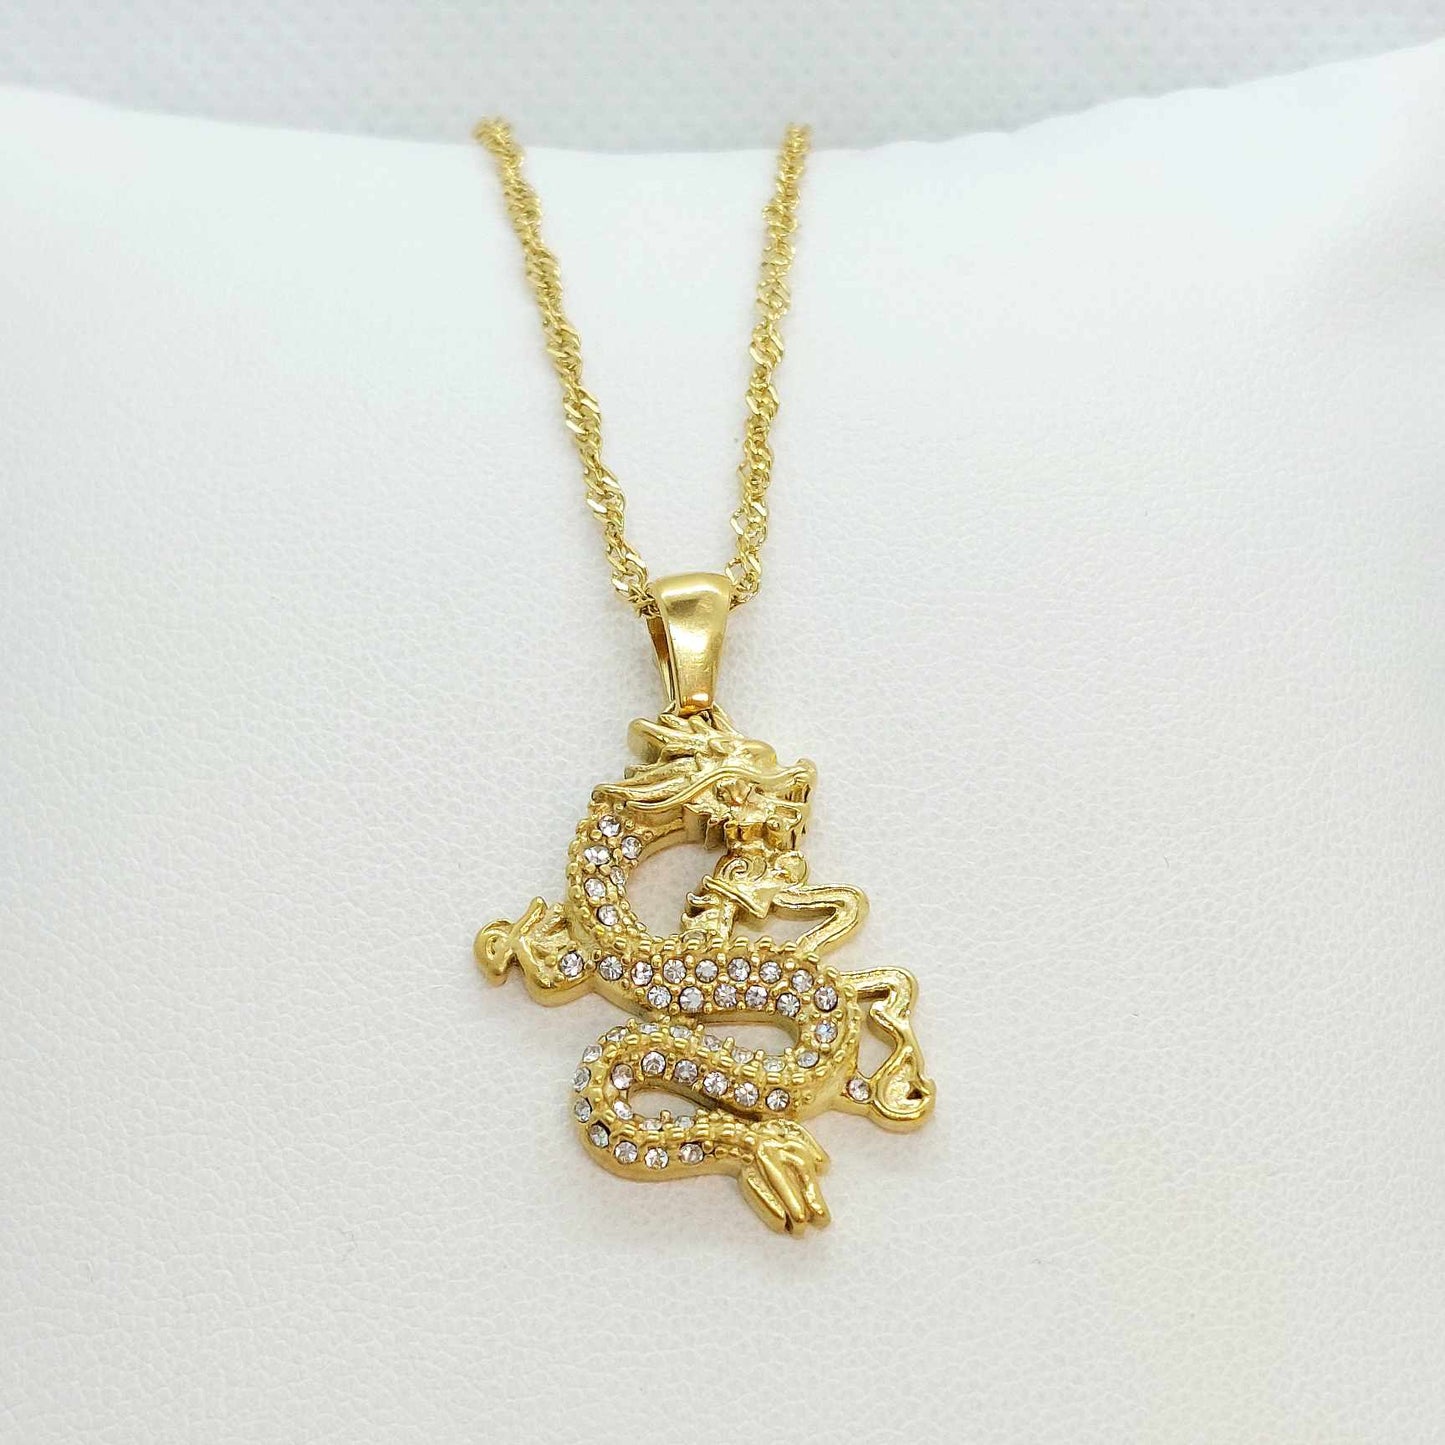 Dragon Pendant in Zircon with Stainless Steel Chain Gold Plated